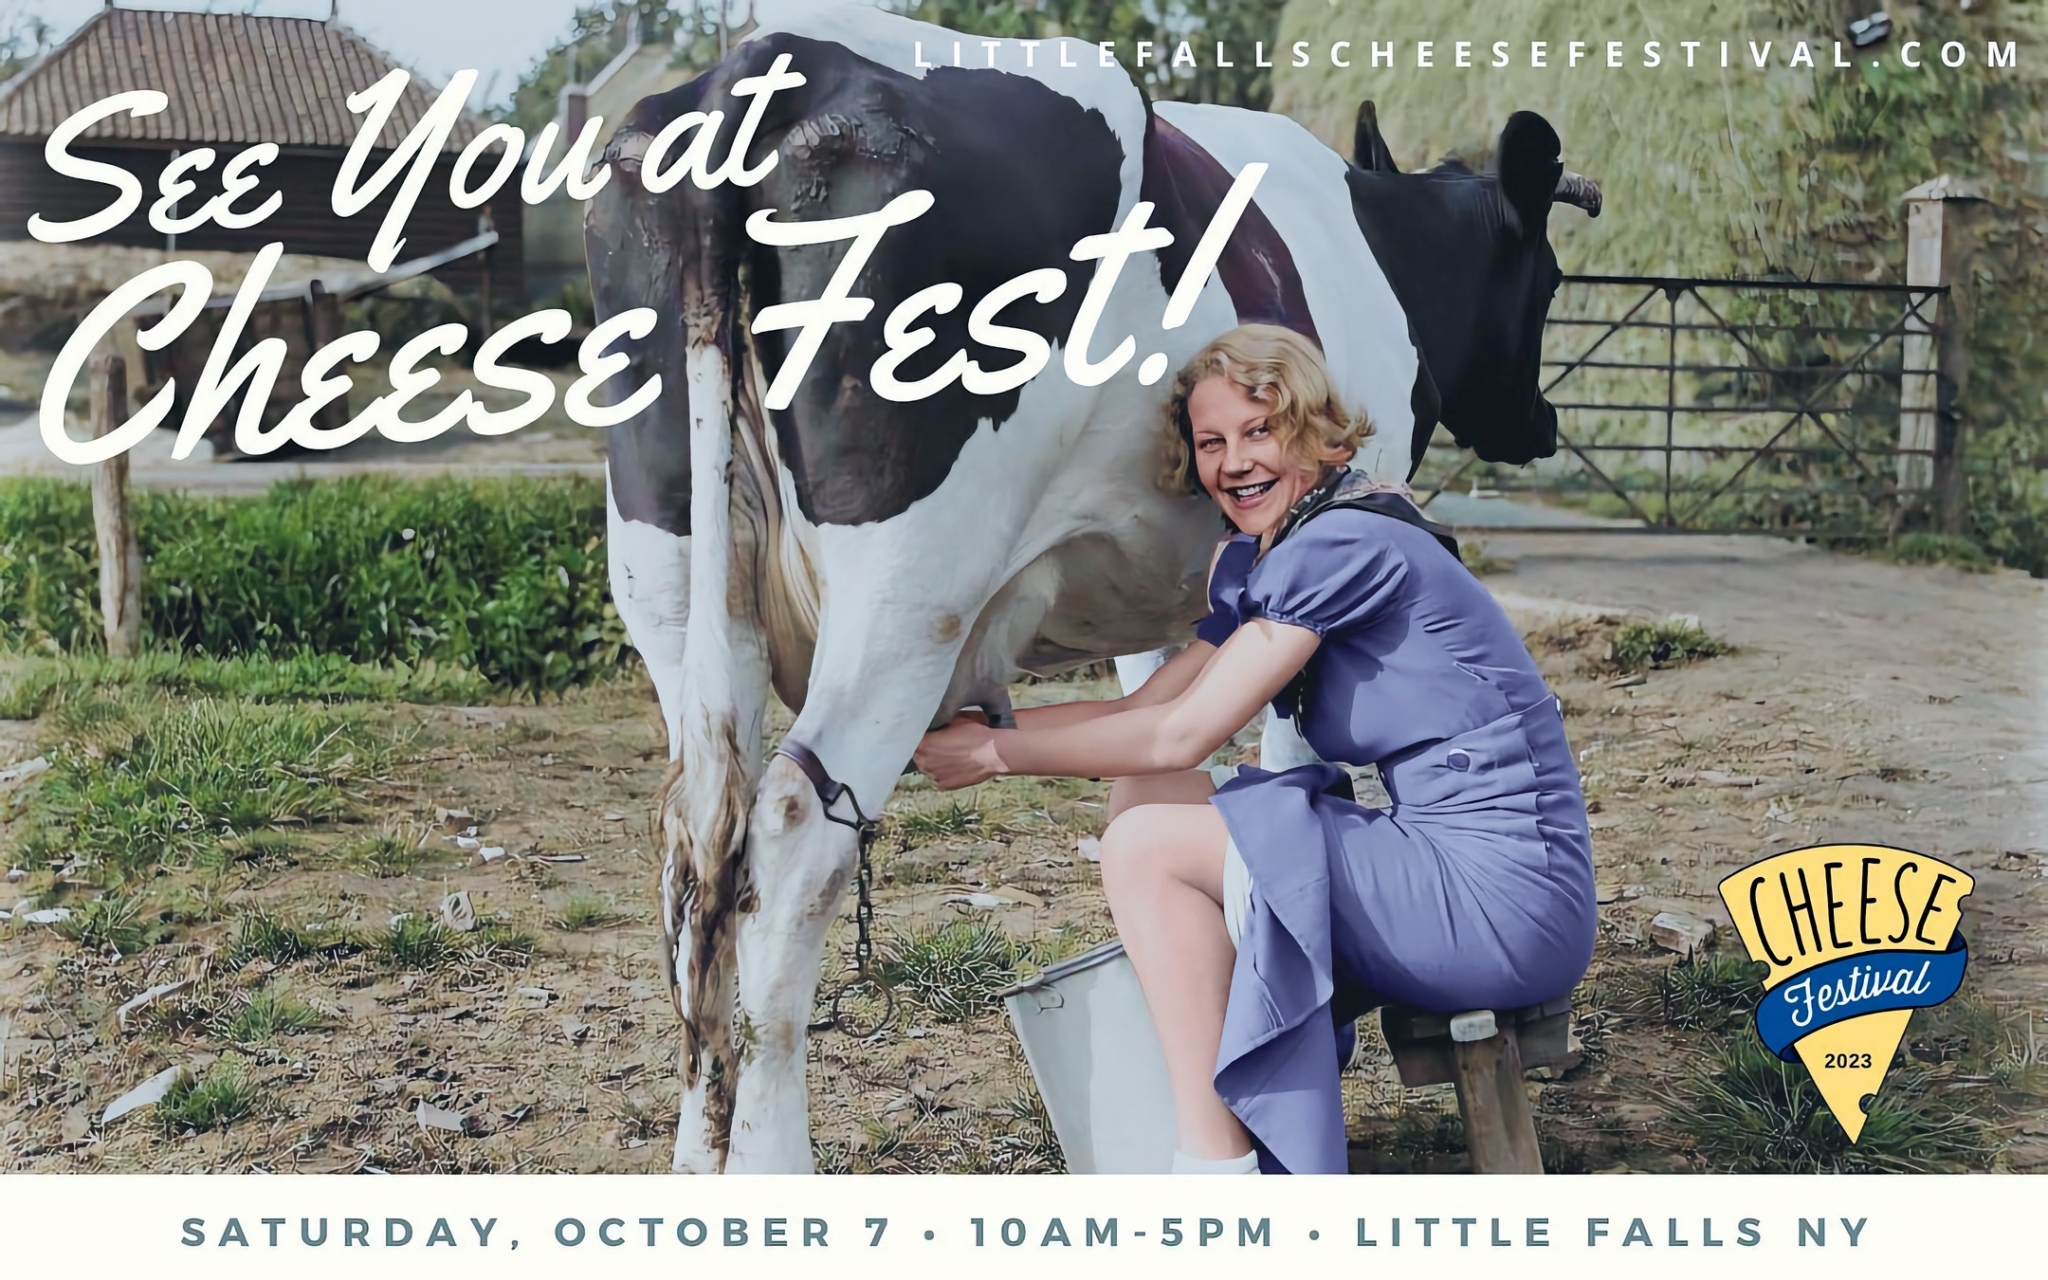 Little Falls Cheese Festival, Photo from Little Falls Cheese Festival Facebook page.